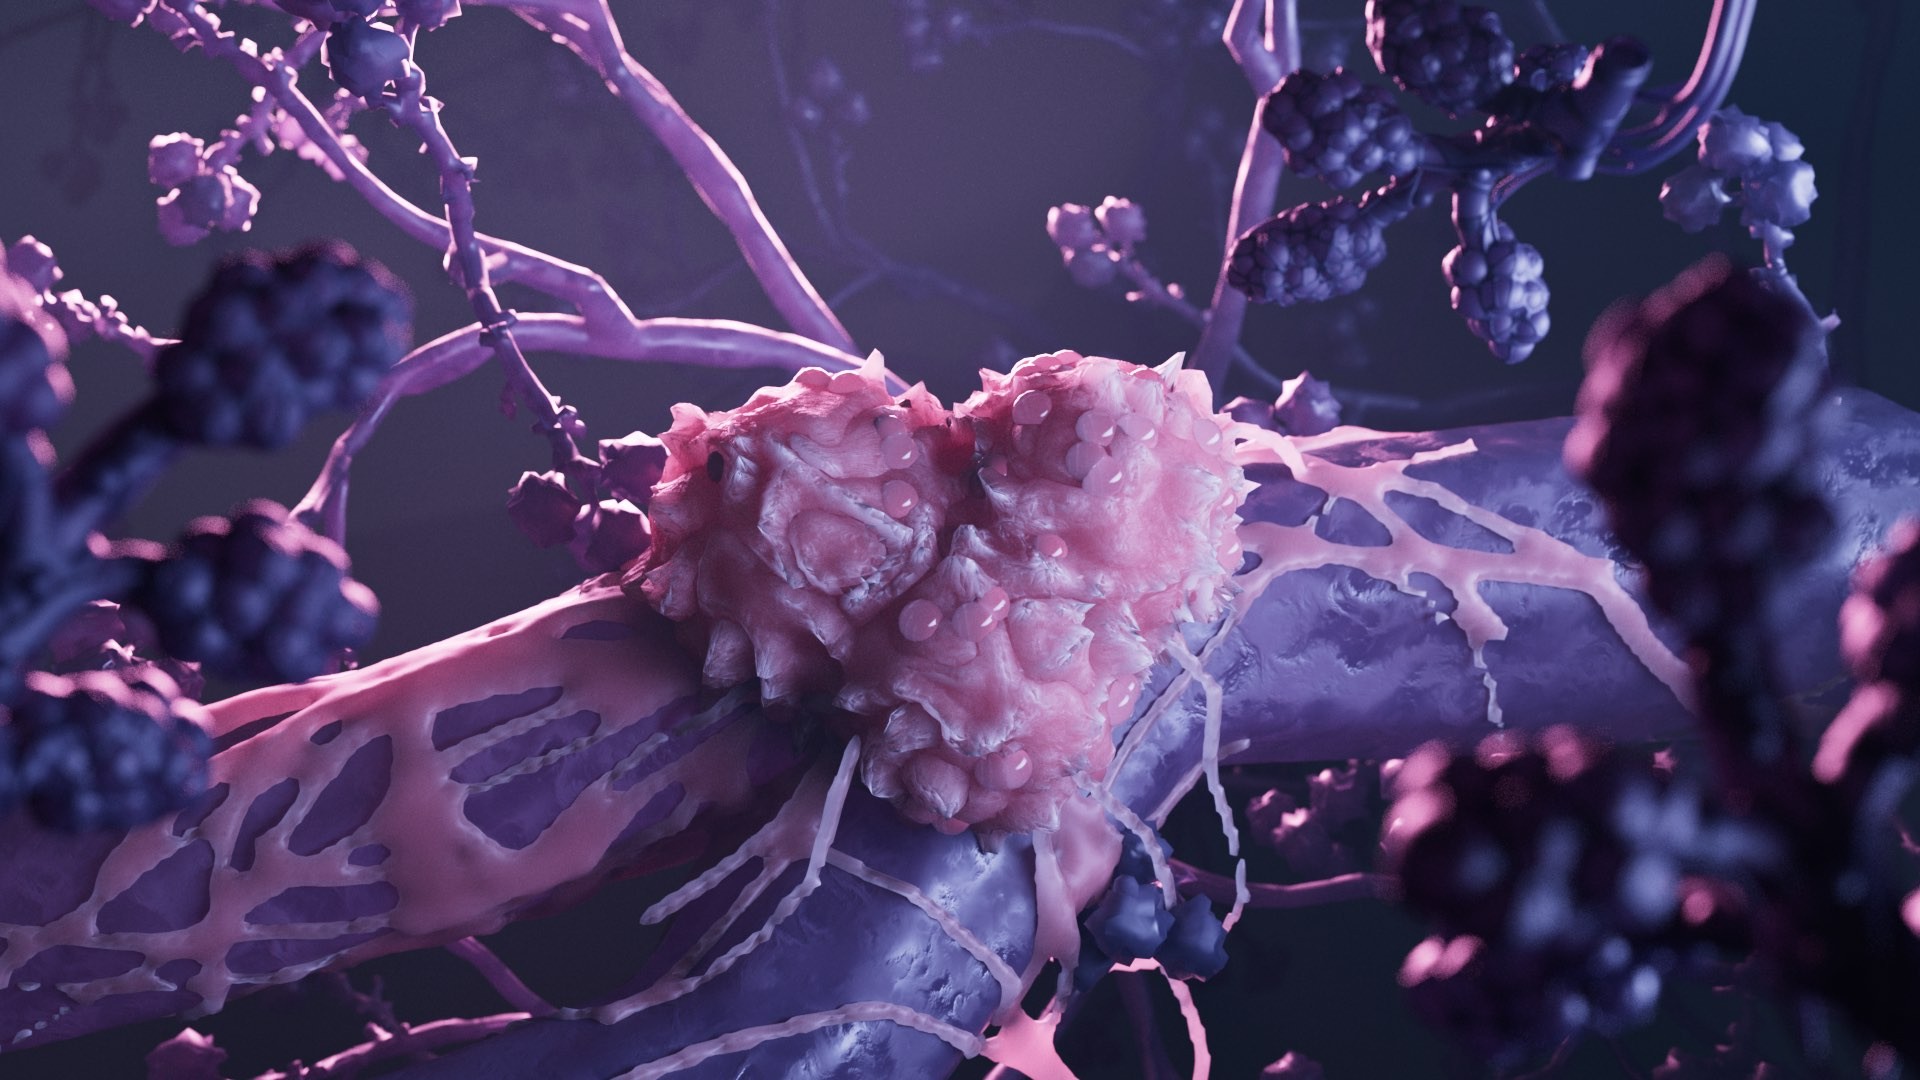 3d animation of Pink malignant tumour in the body.jpg